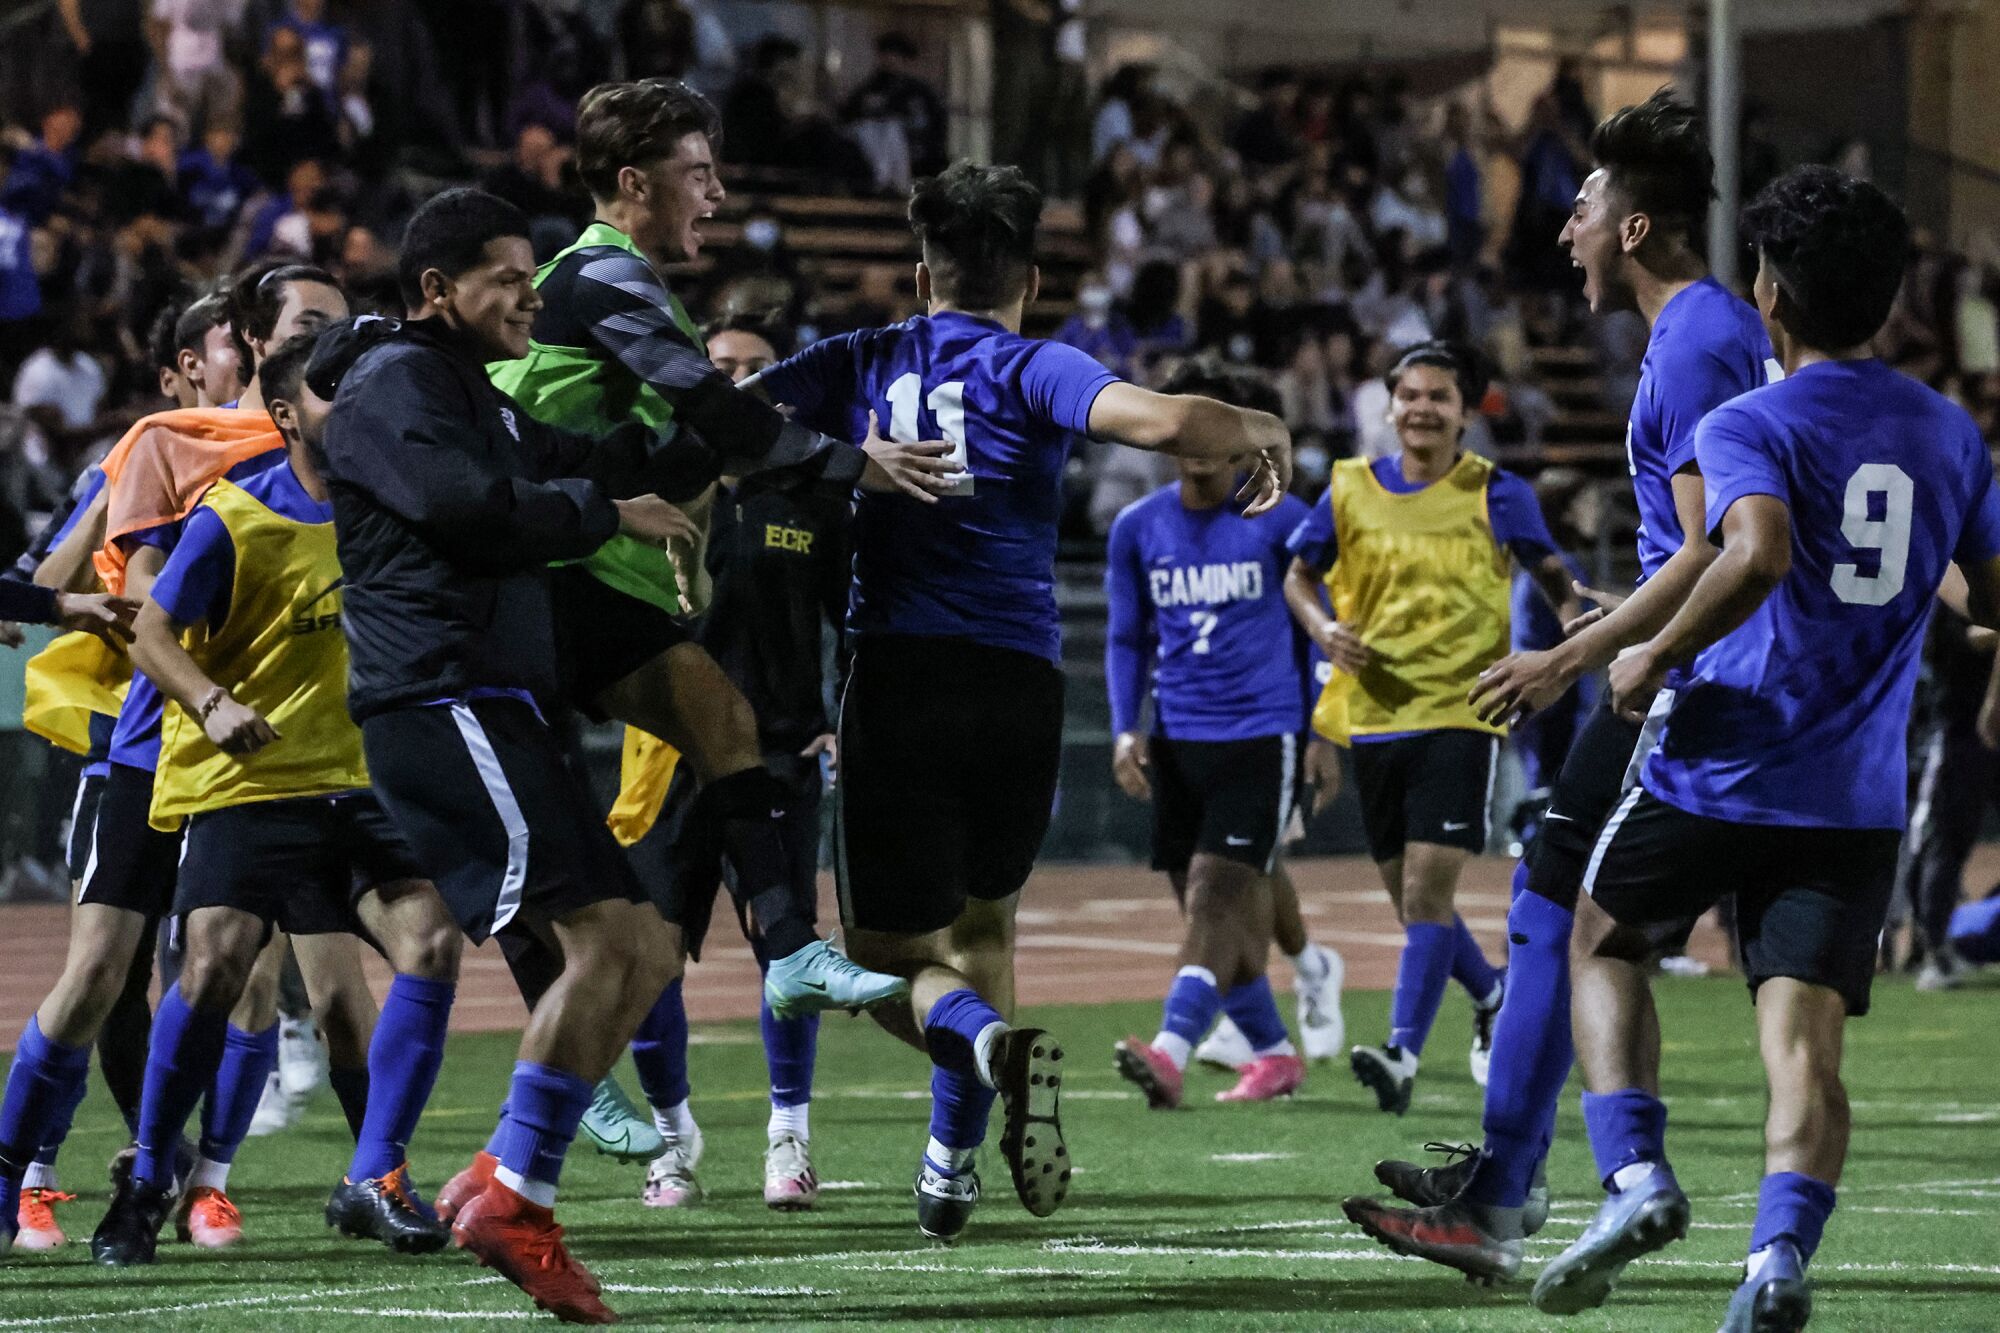 El Camino Real players celebrate following a successful penalty kick by teammate Julio Chacon.